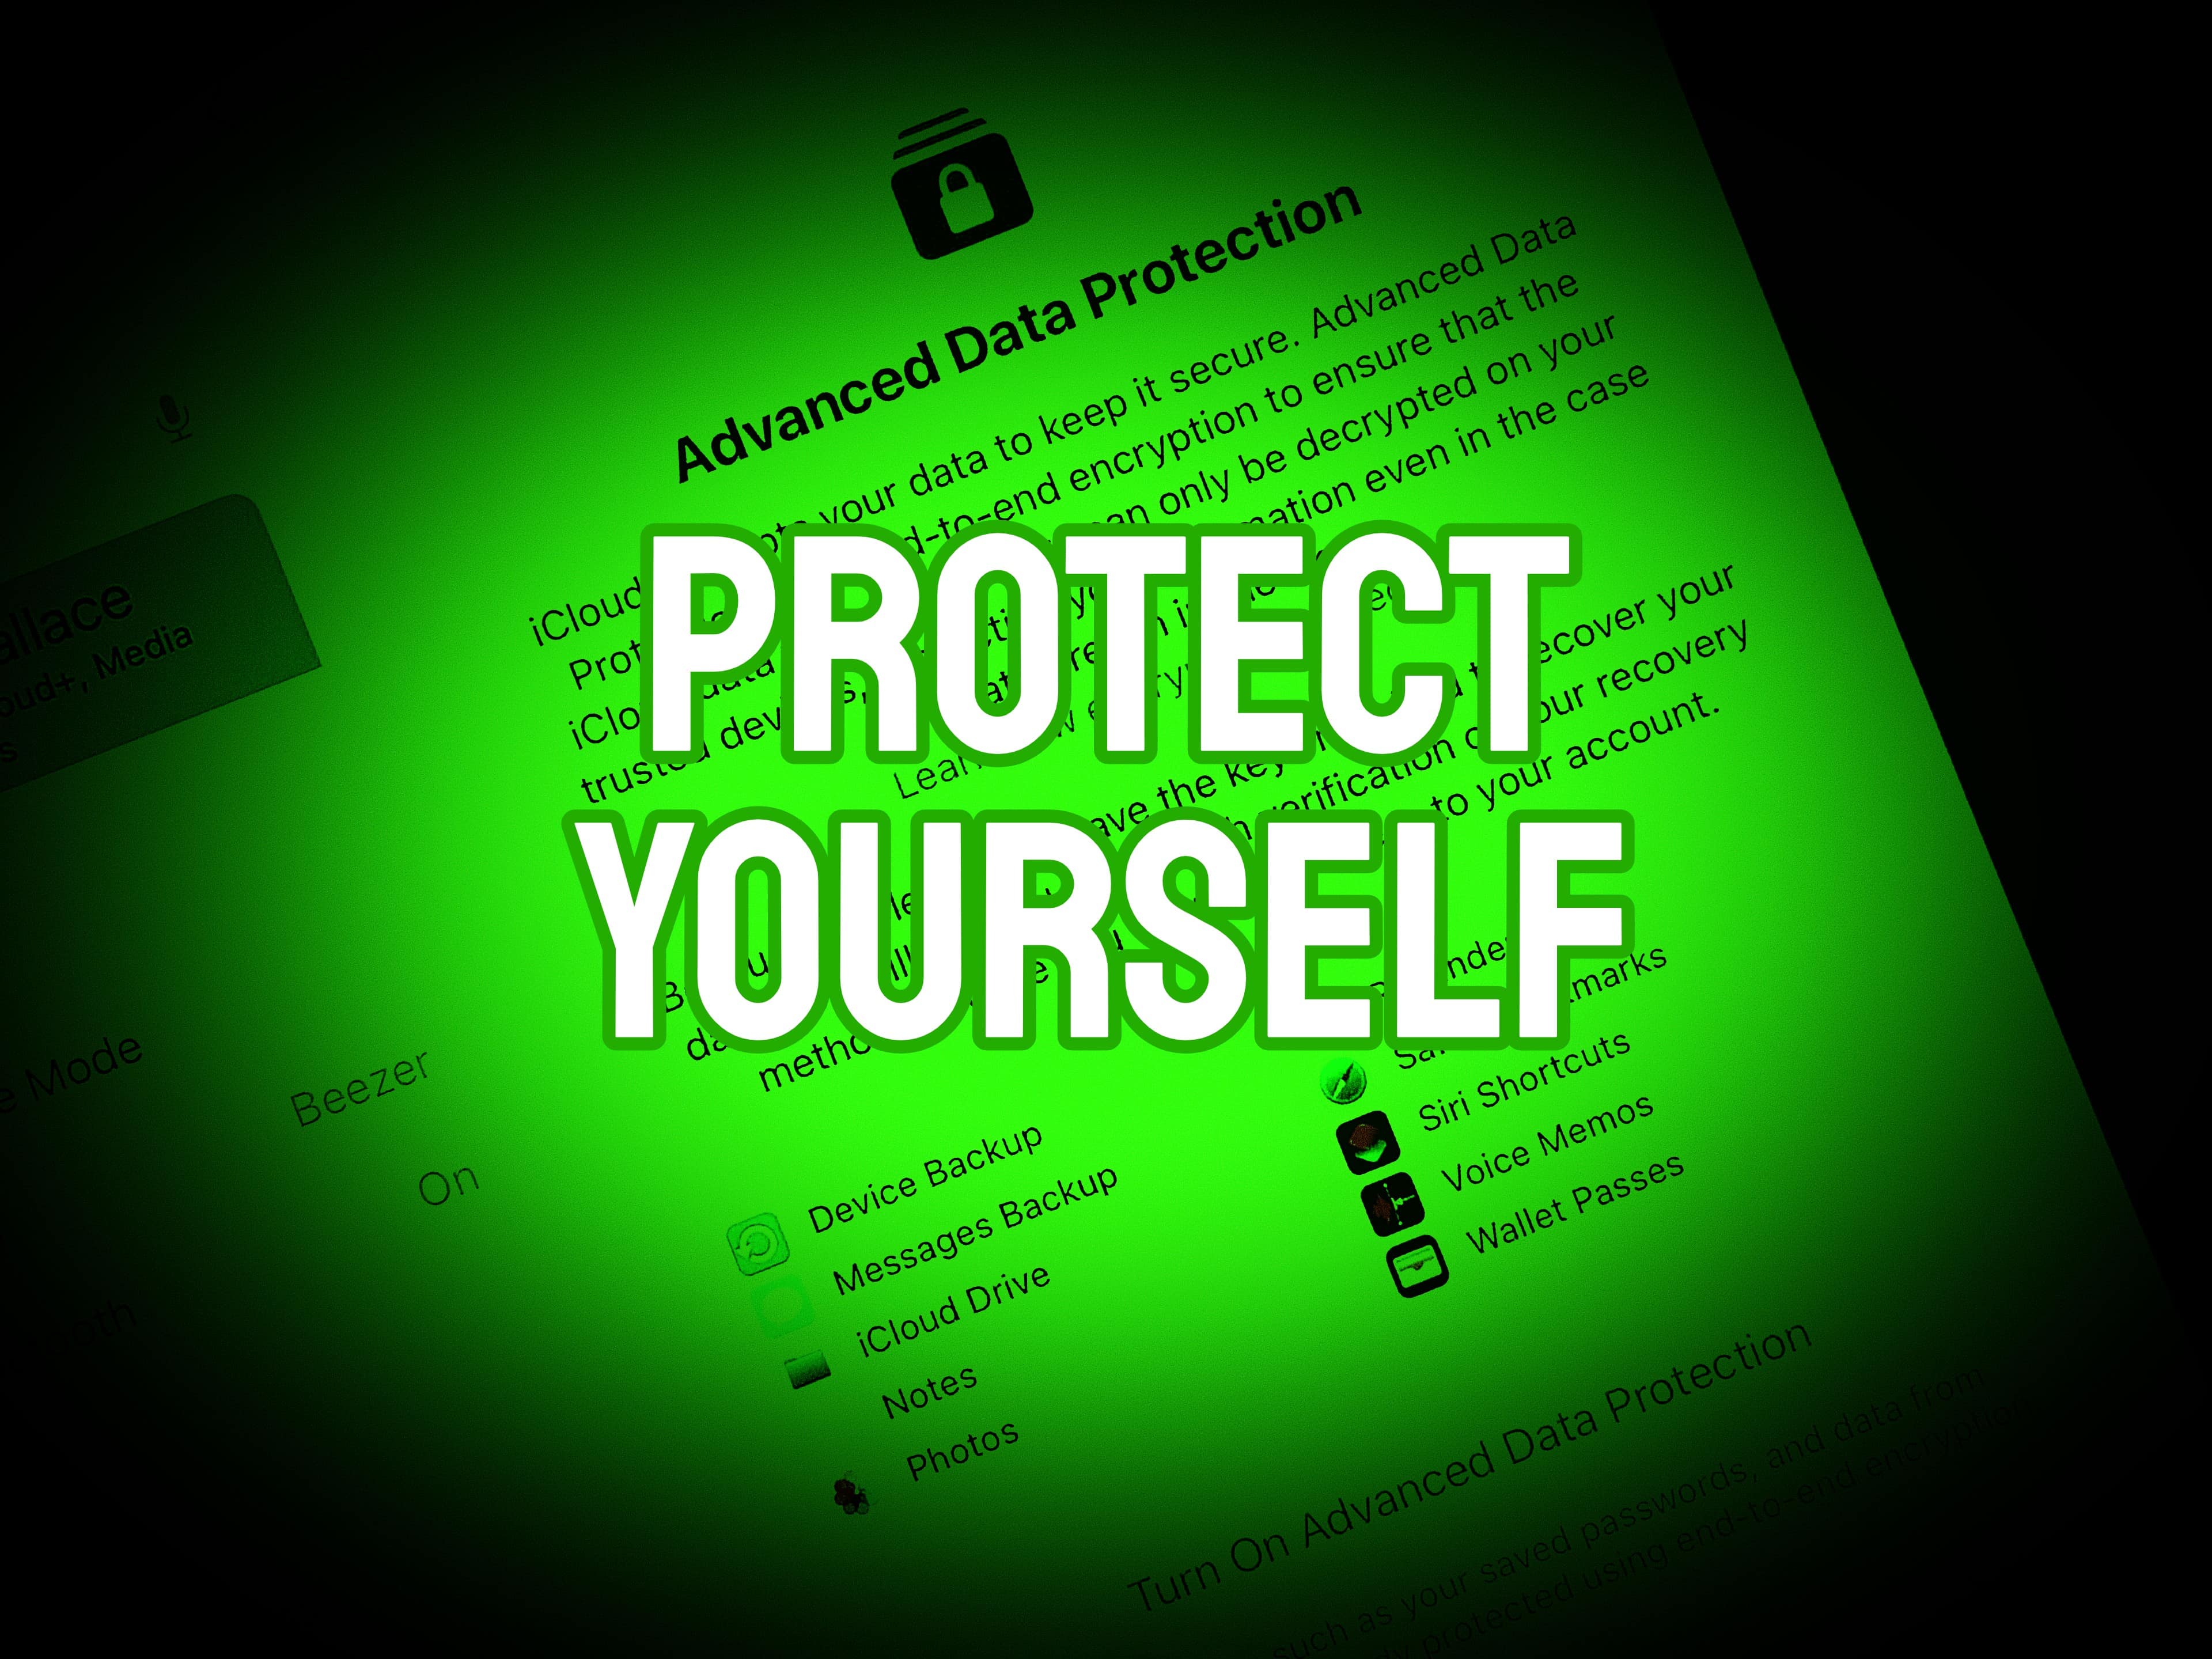 How to make iCloud more secure with Advanced Data Protection